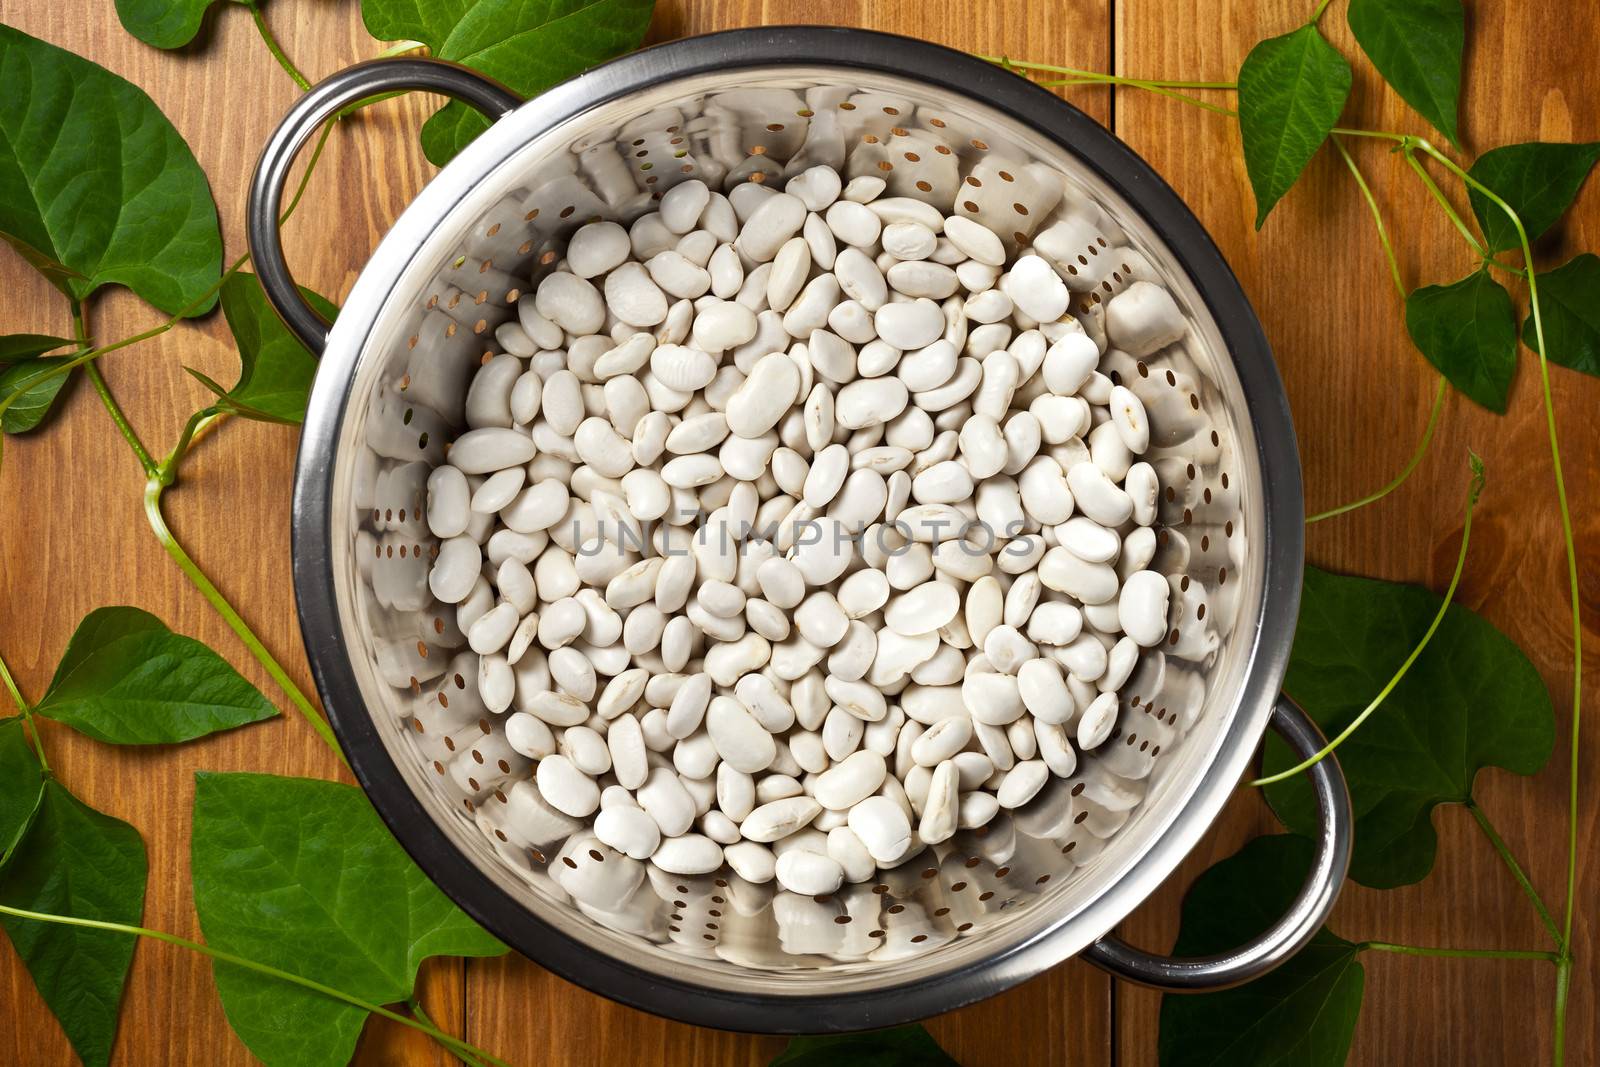 White beans with green leaves on wooden table background. Top view